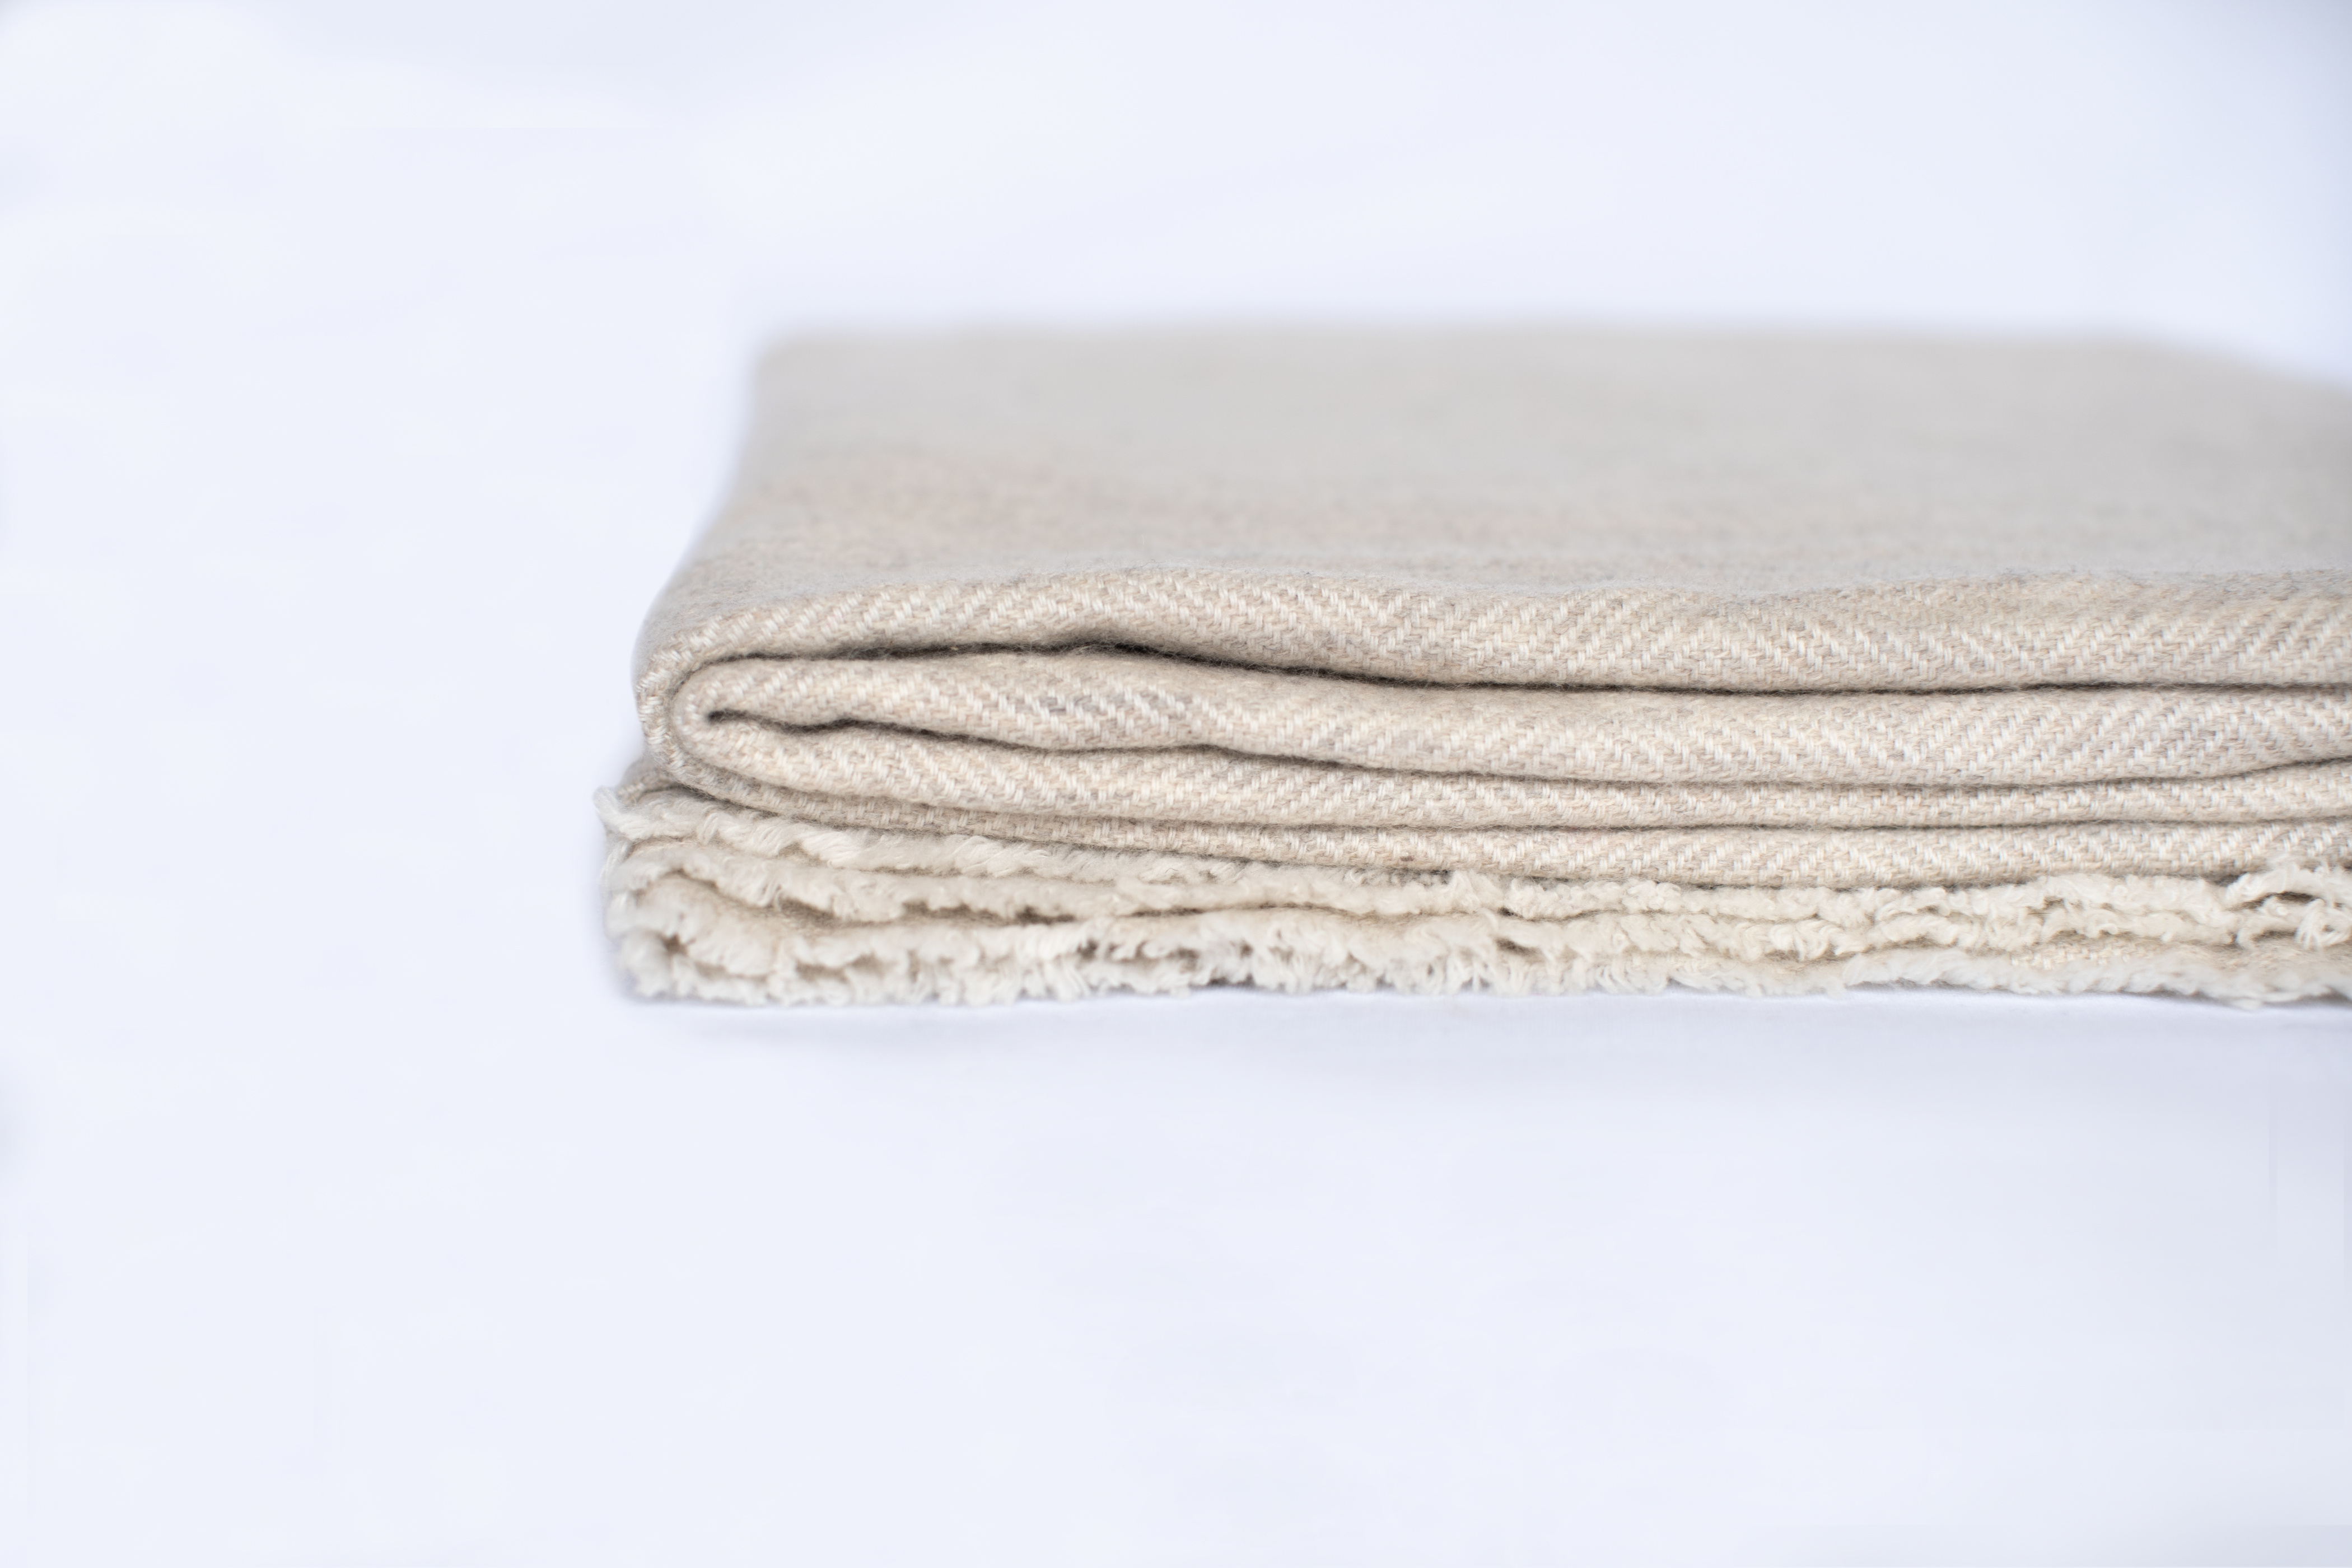 Himalayan Cashmere Throw Blanklet - Cream beige